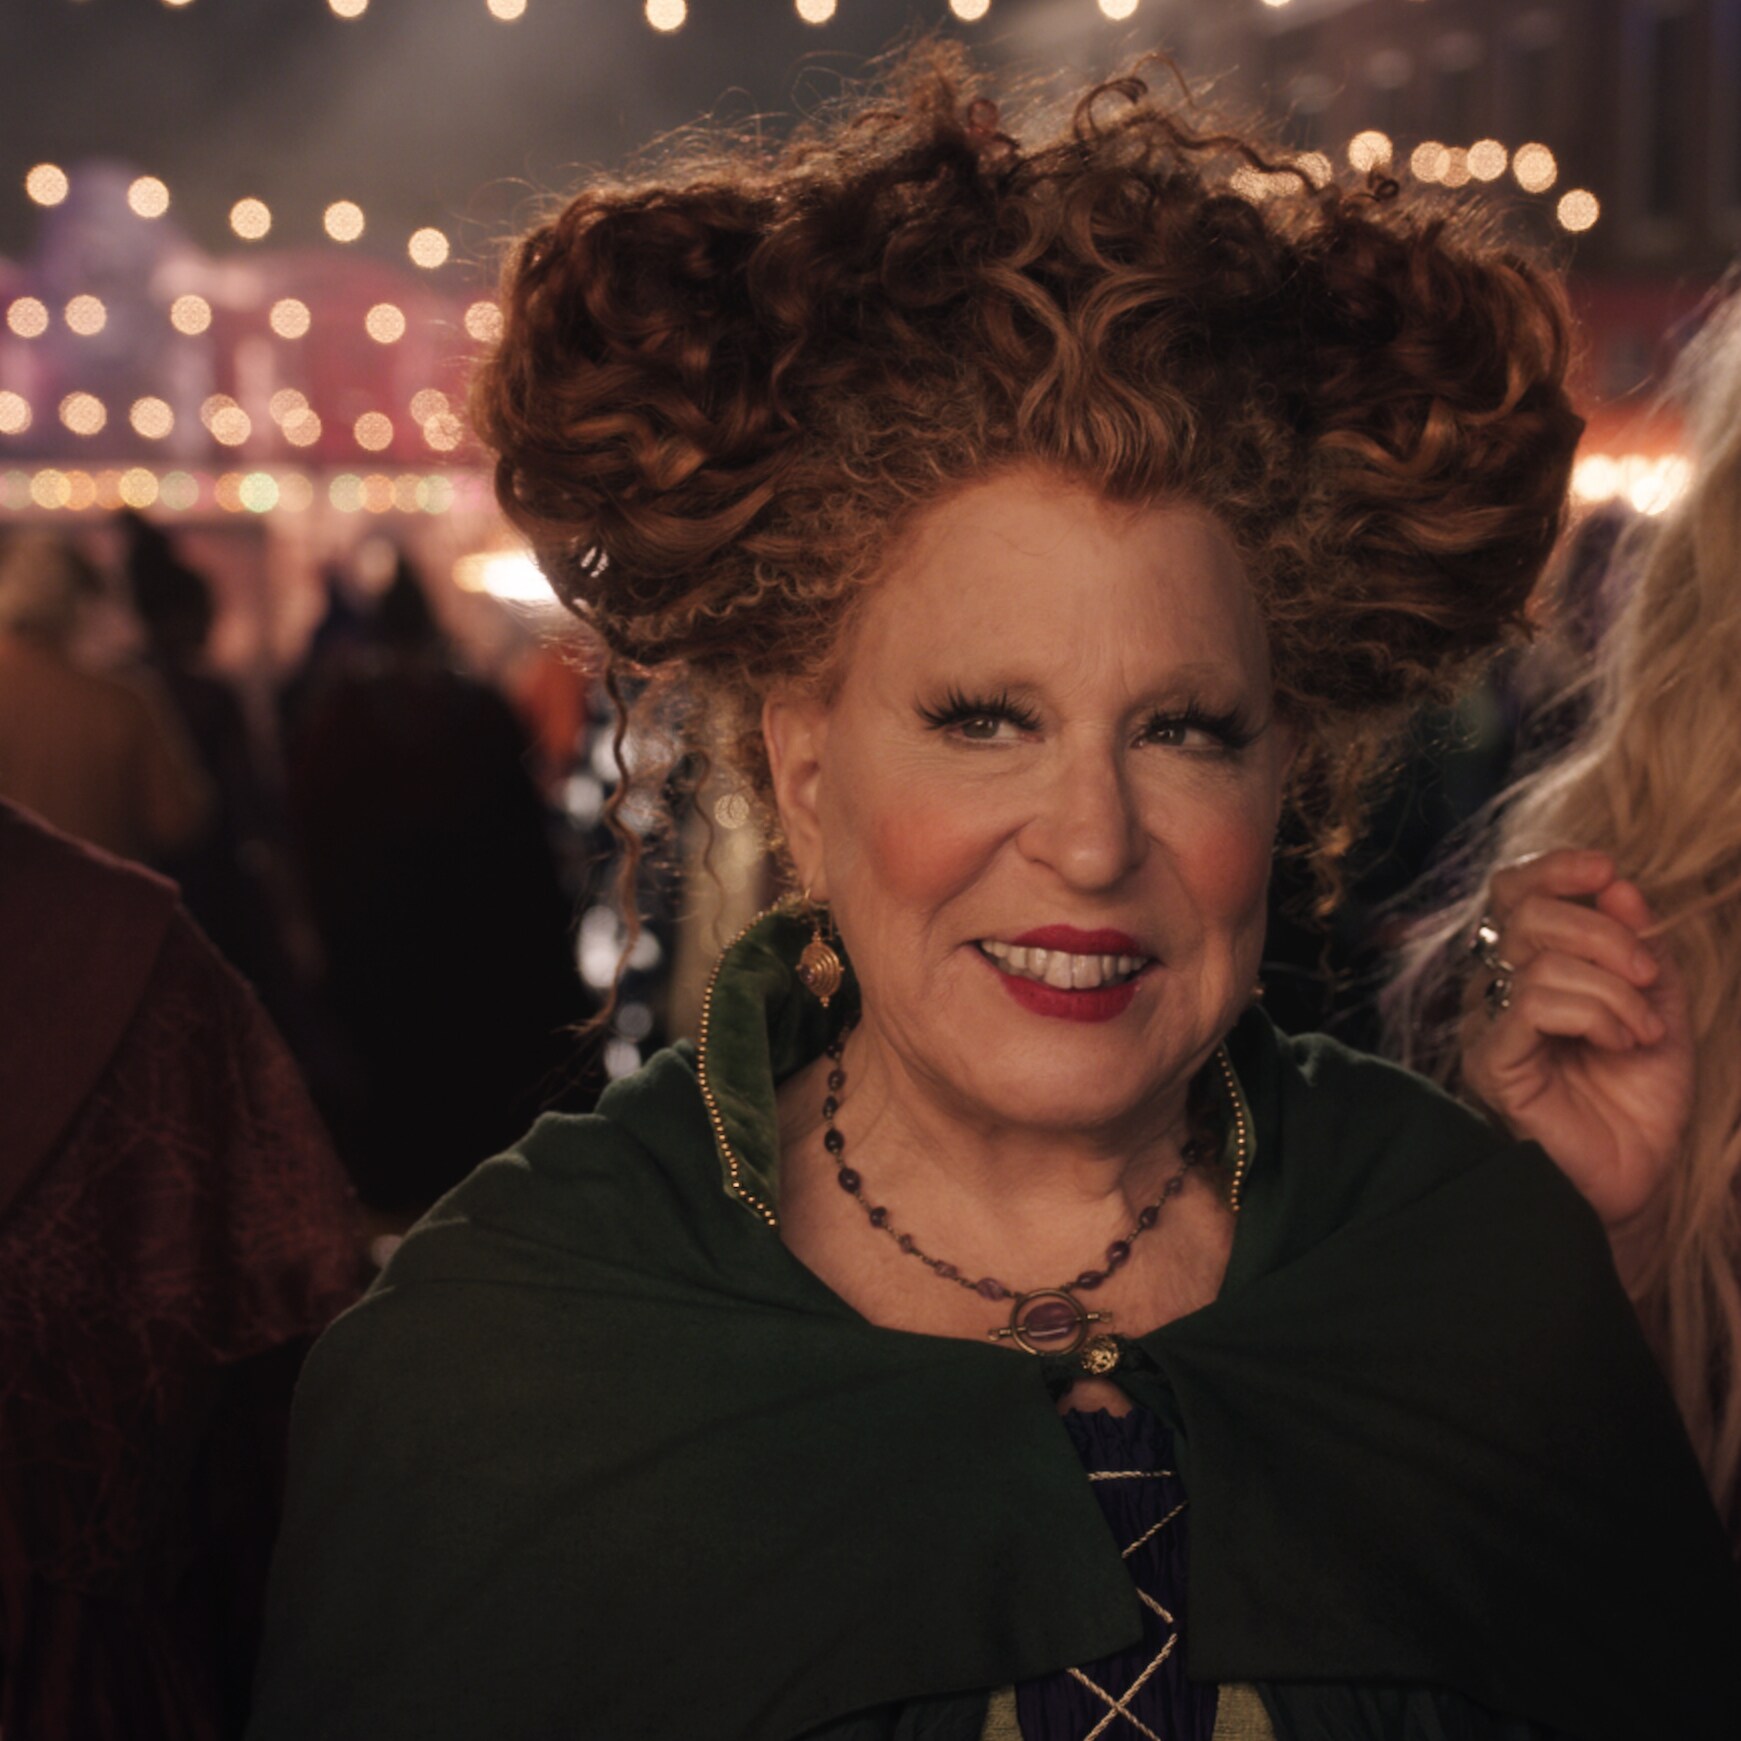 Disney+ Releases New Key Art for 'Hocus Pocus 2' - Nerds and Beyond